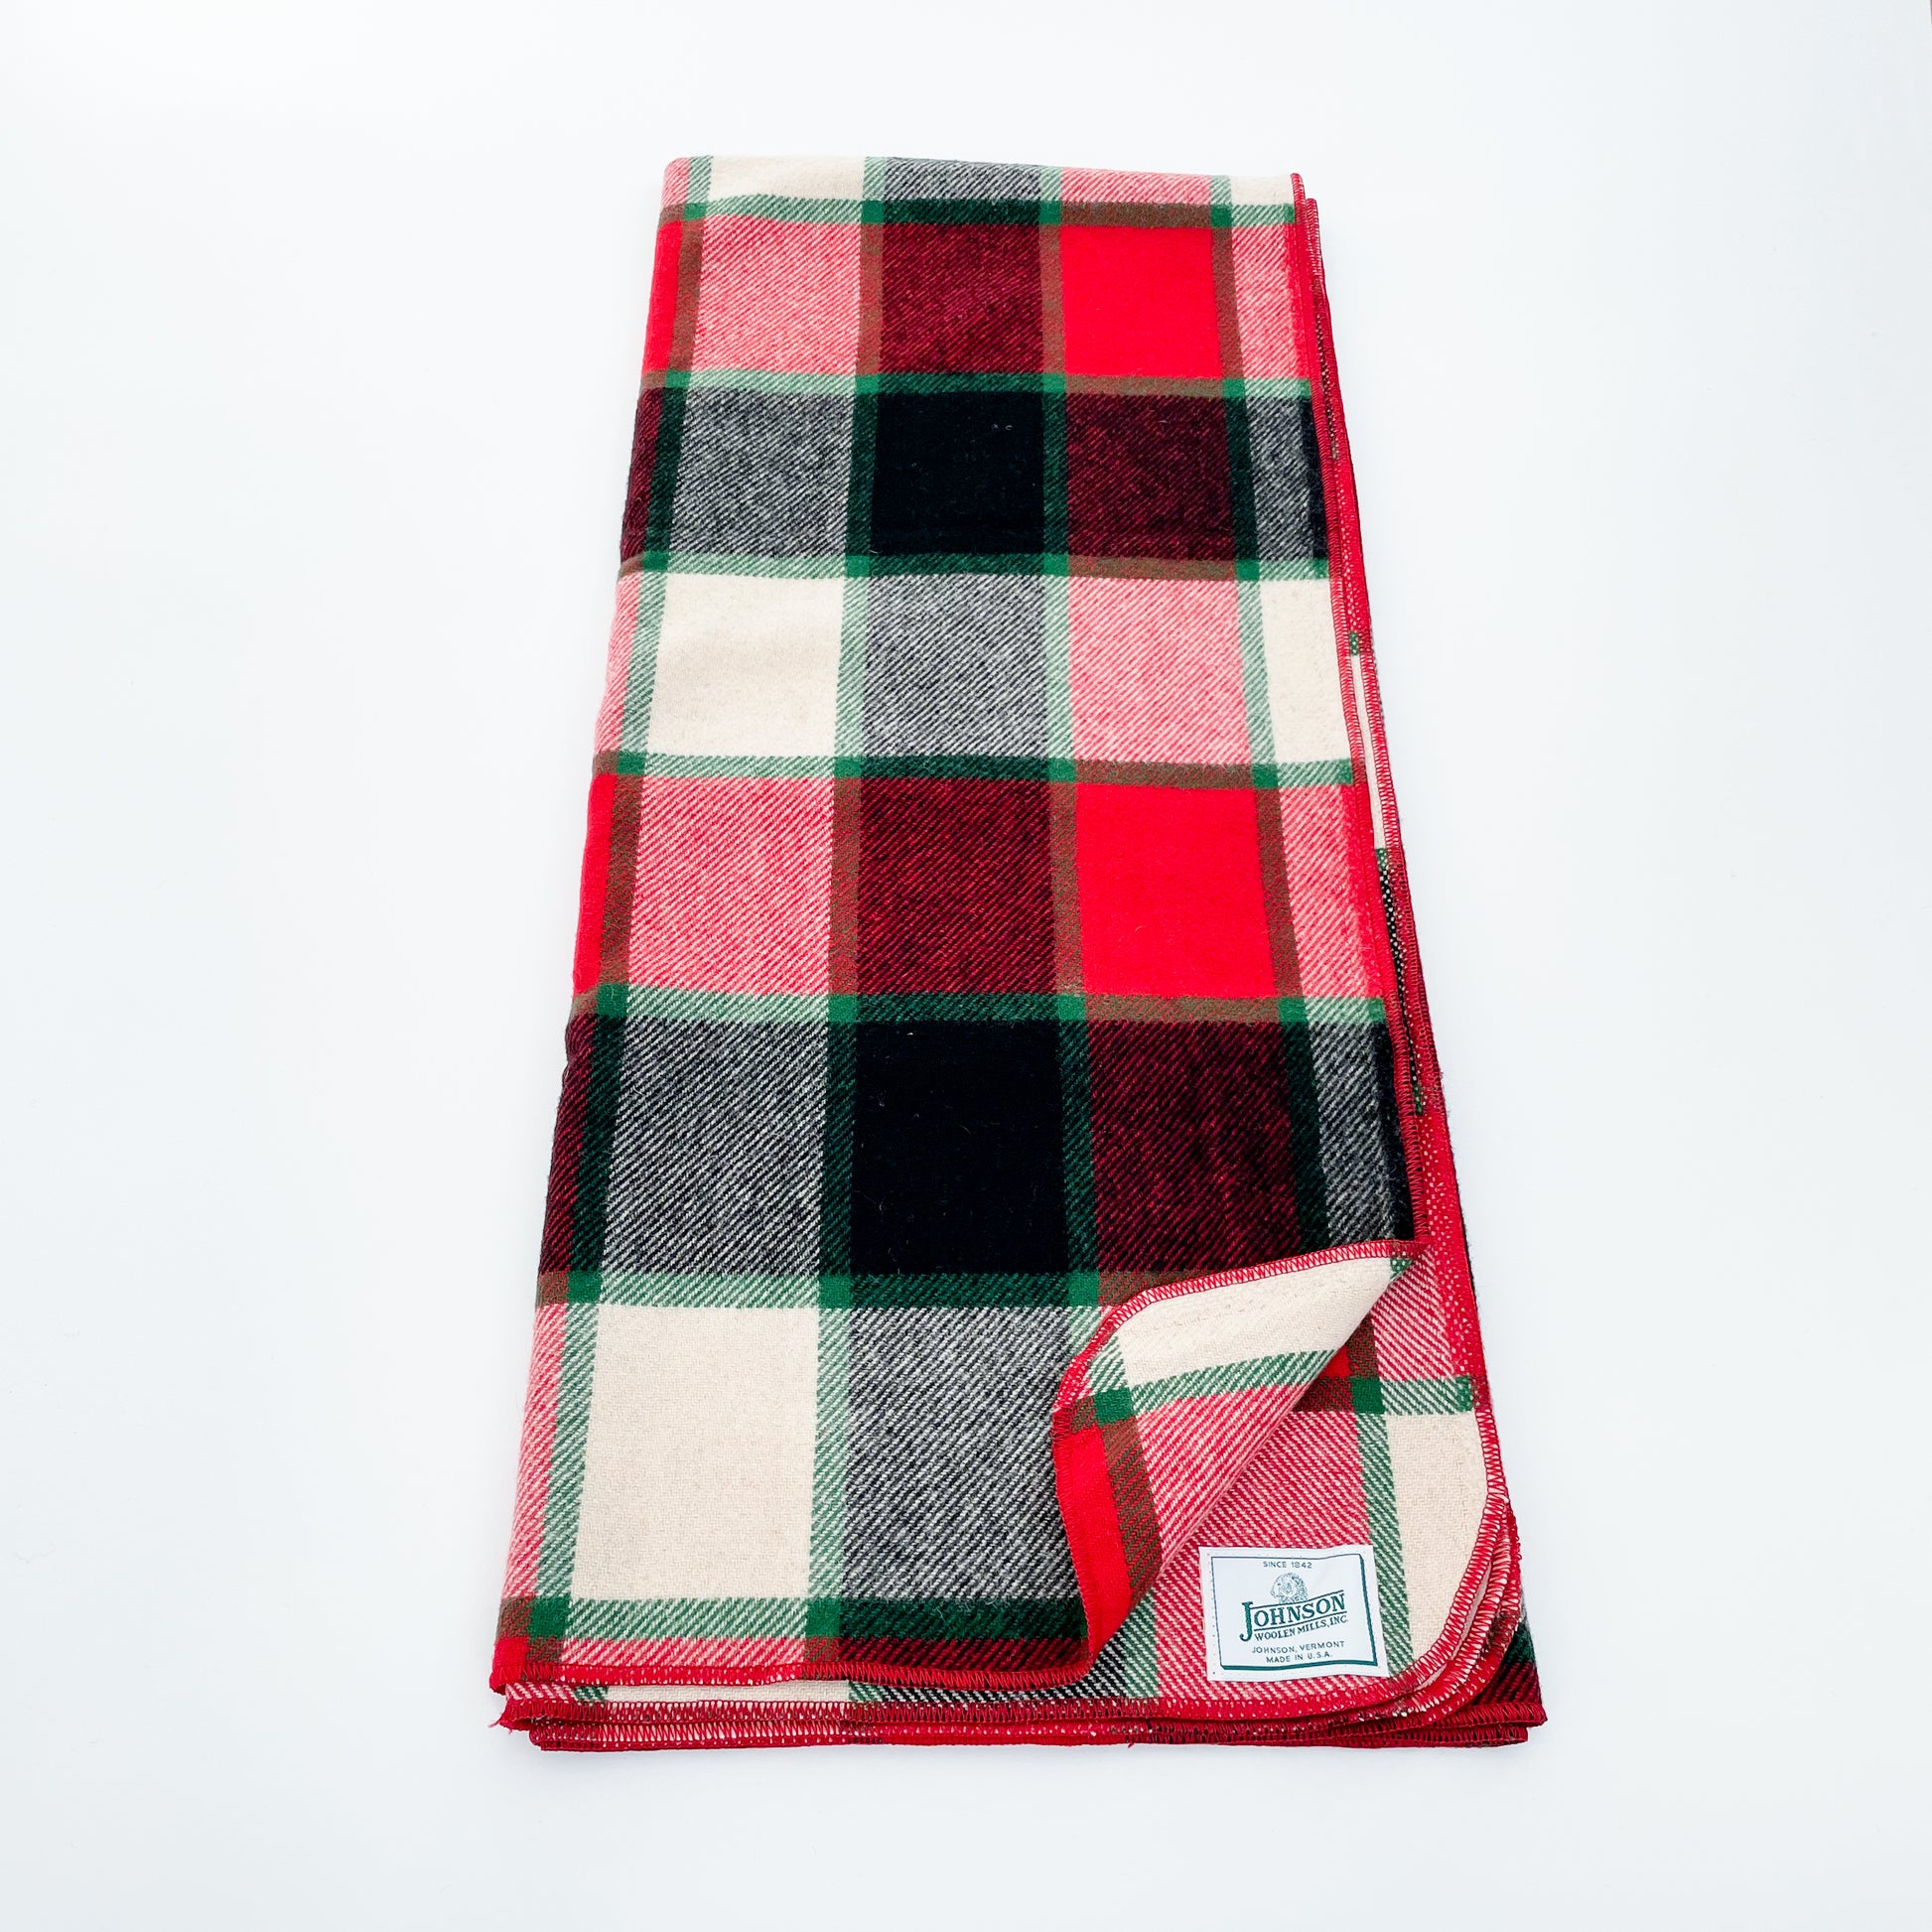 Johnson Woolen Mills Throw, Old Canadian Plaid, Rust/Green/Ivory/Black Plaid, unfolded view